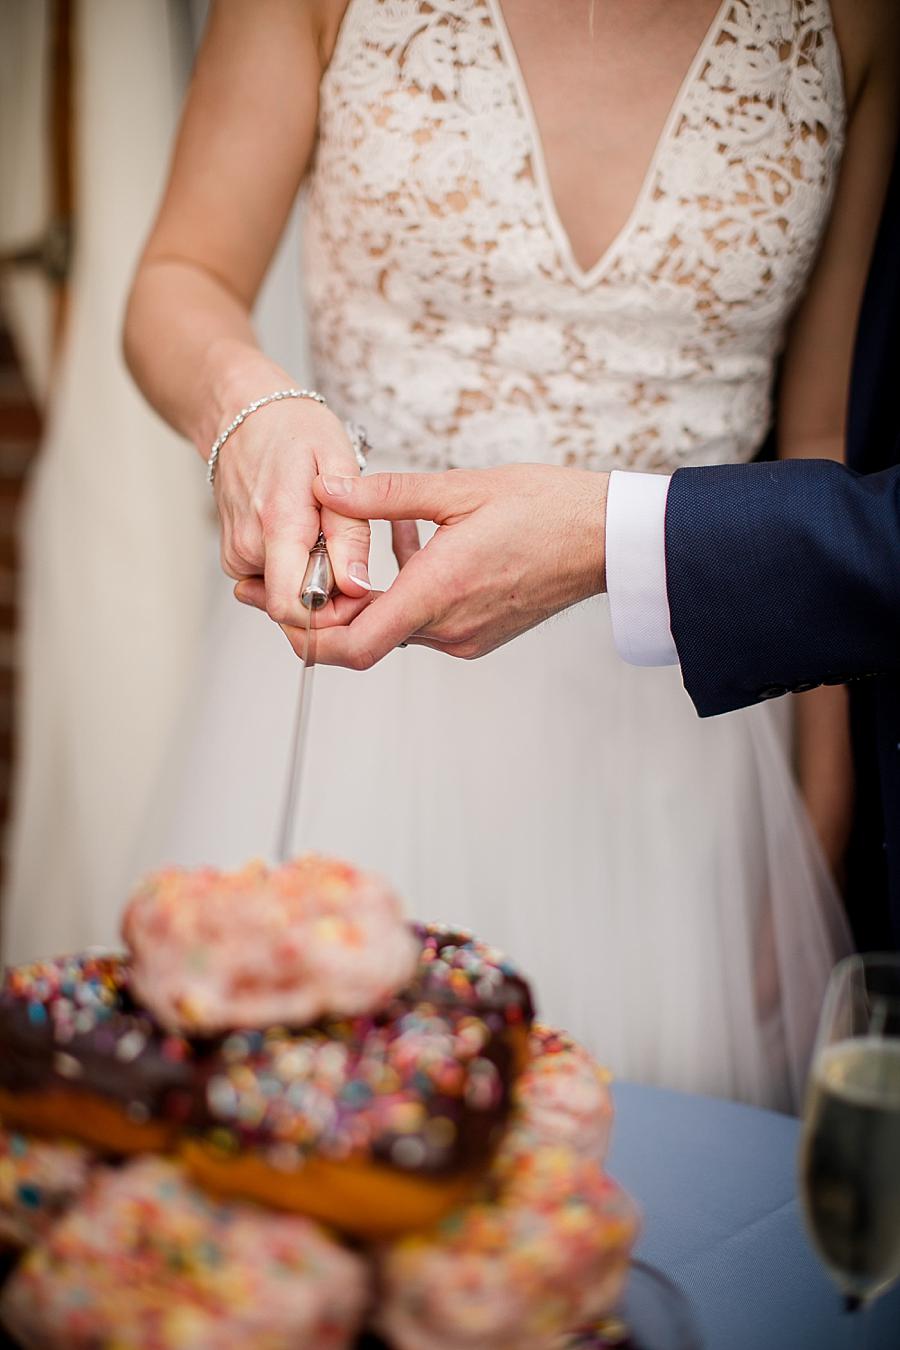 Chocolate sprinkles at this Upstairs at Midtown Wedding by Knoxville Wedding Photographer, Amanda May Photos.